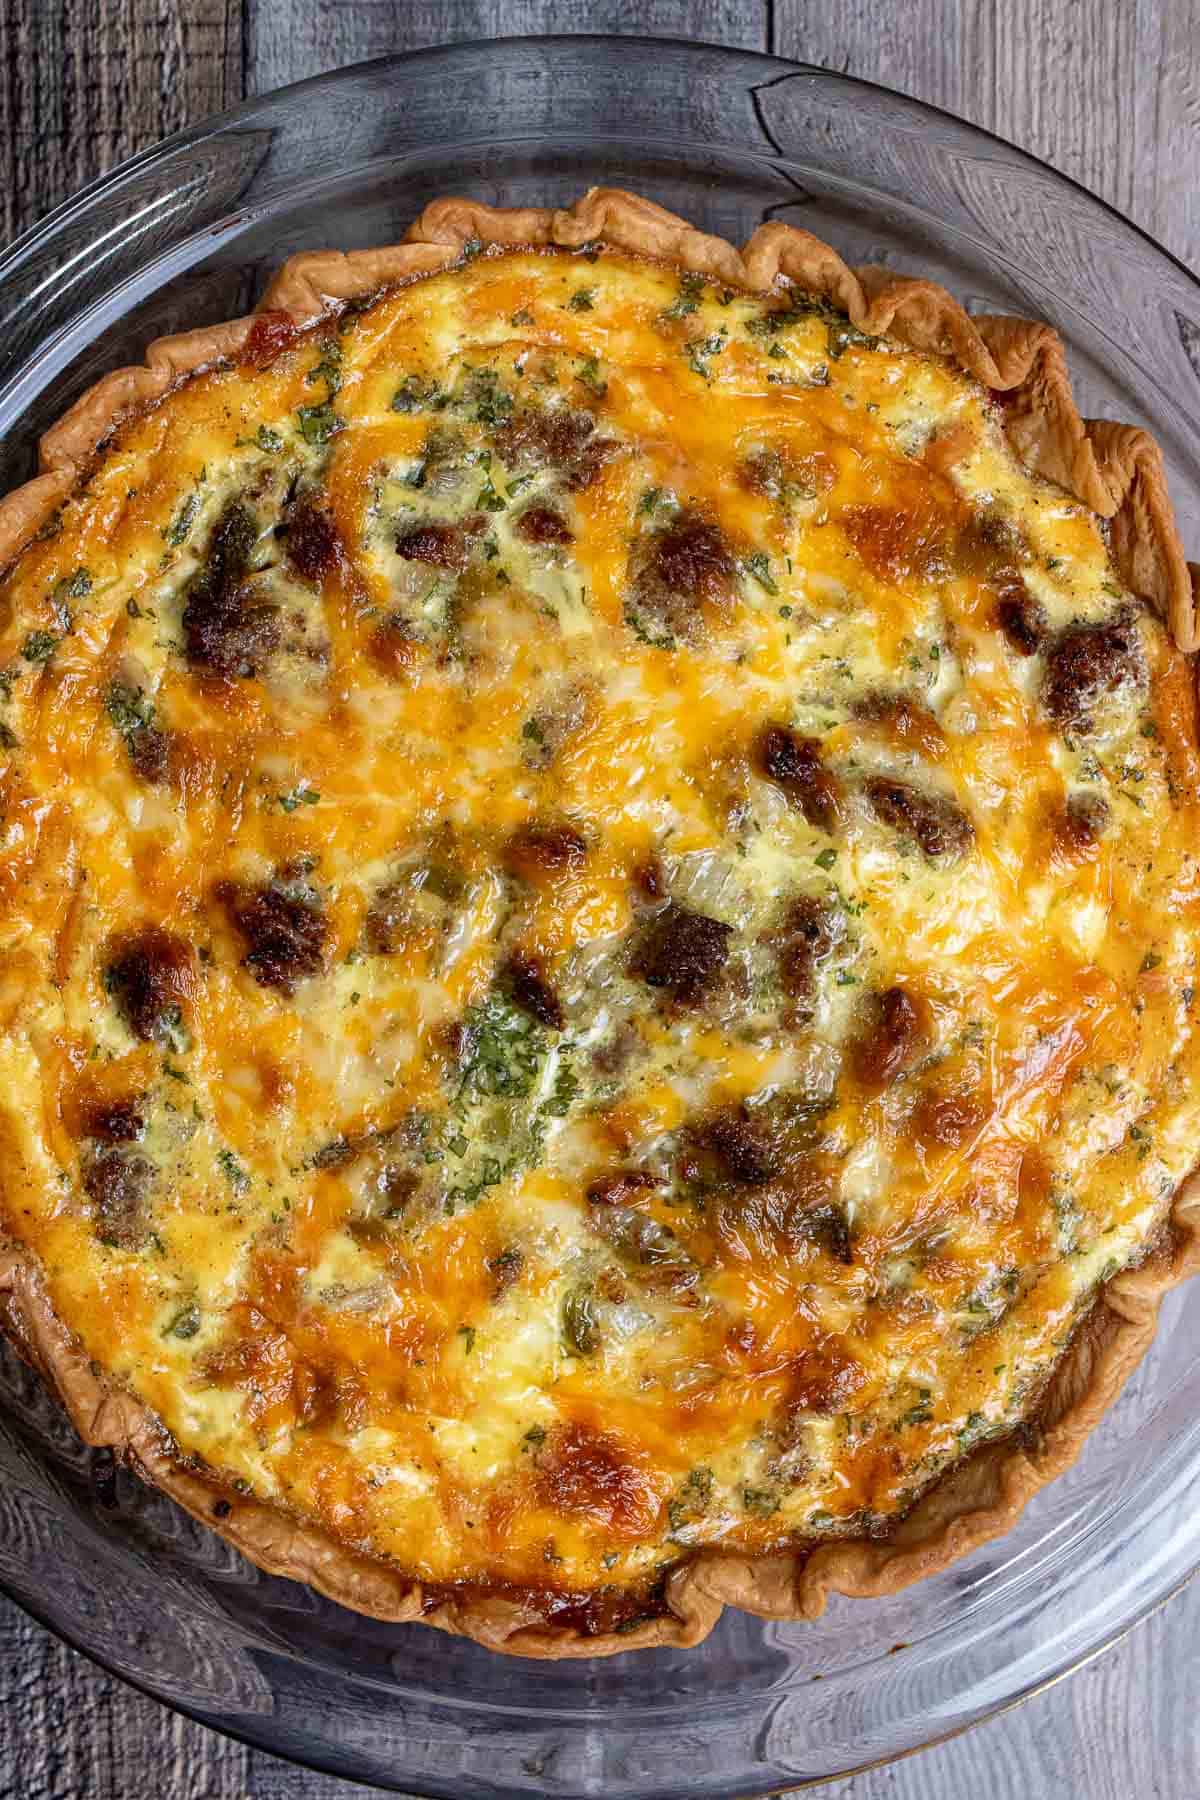 Baked and cooled Hatch green chile and sausage quiche.